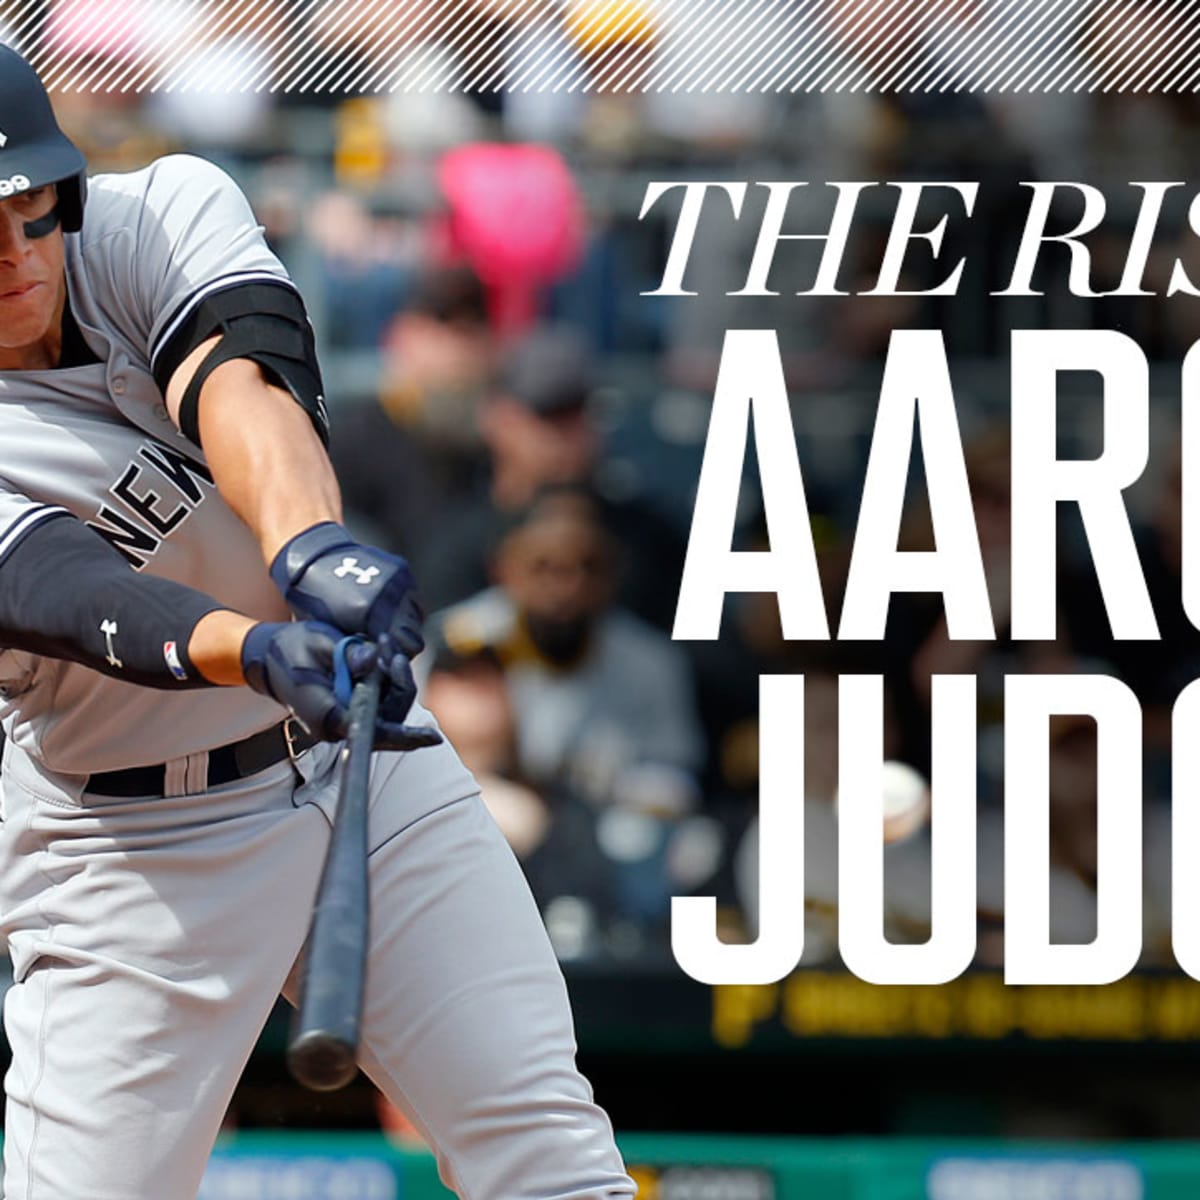 New York Yankees' Aaron Judge Takes First Step Towards Return - Sports  Illustrated NY Yankees News, Analysis and More